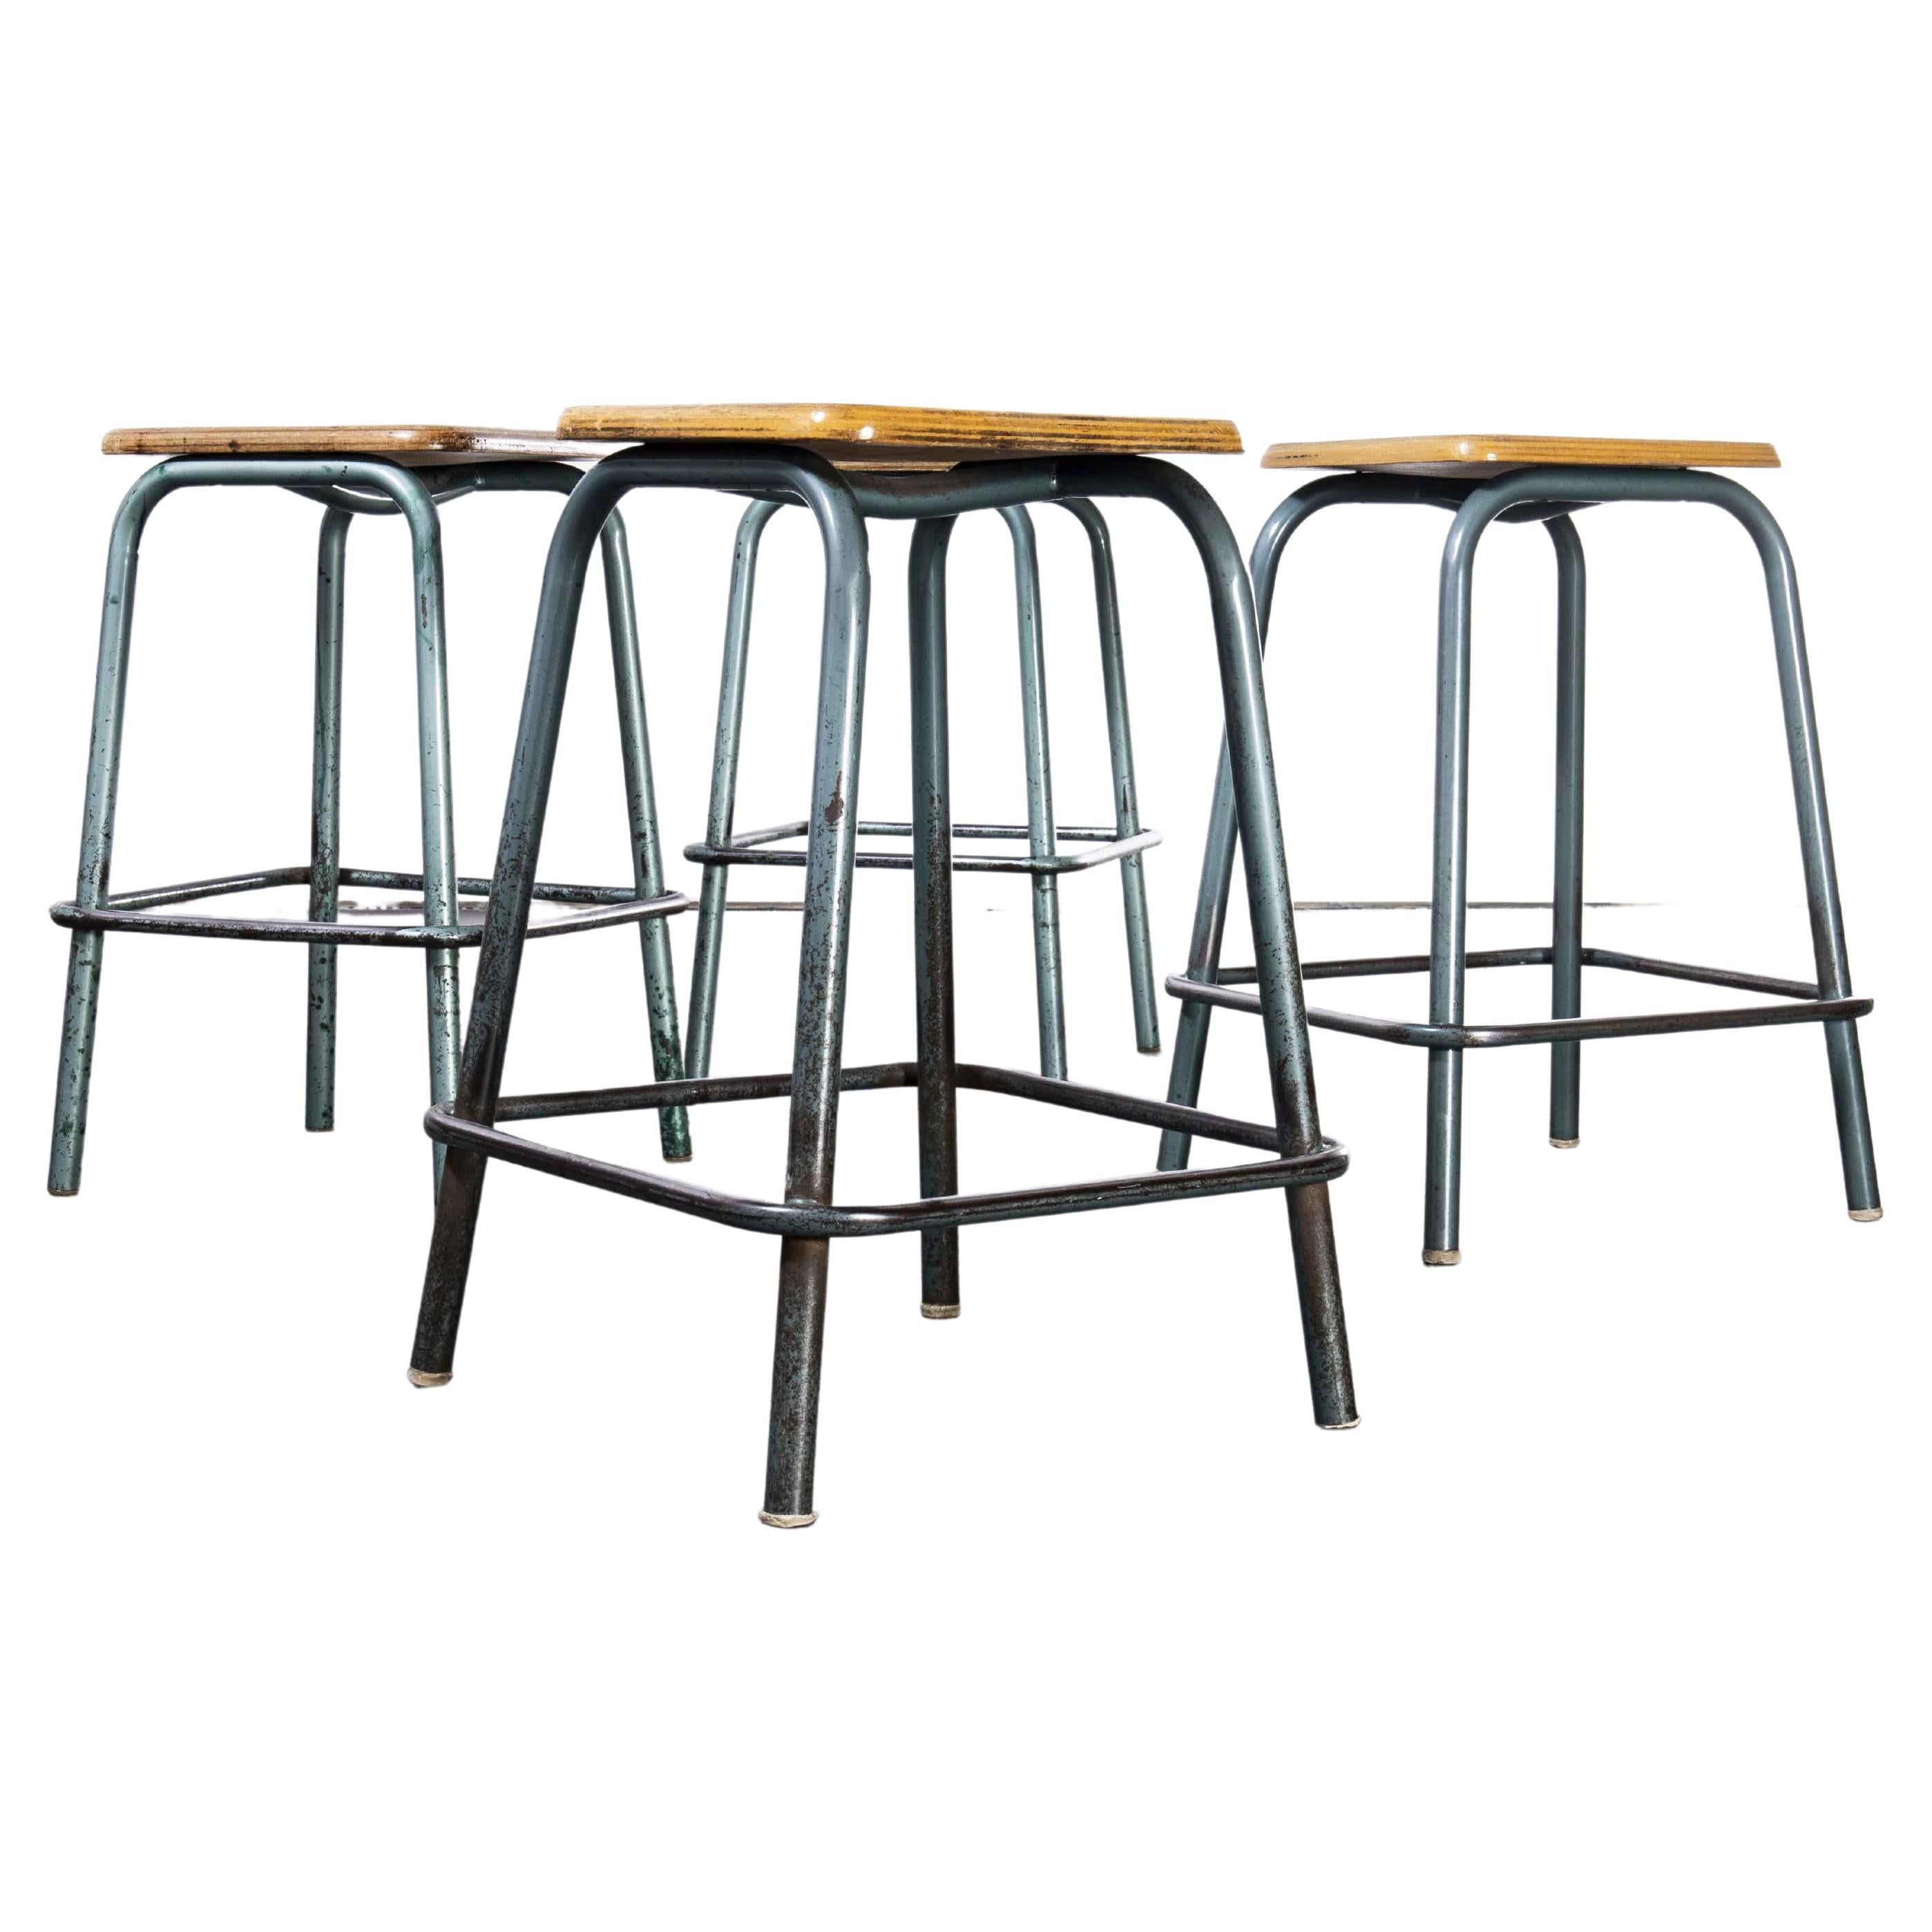 1950's Mullca French Stools, Aqua Square Seat, Set of Four For Sale